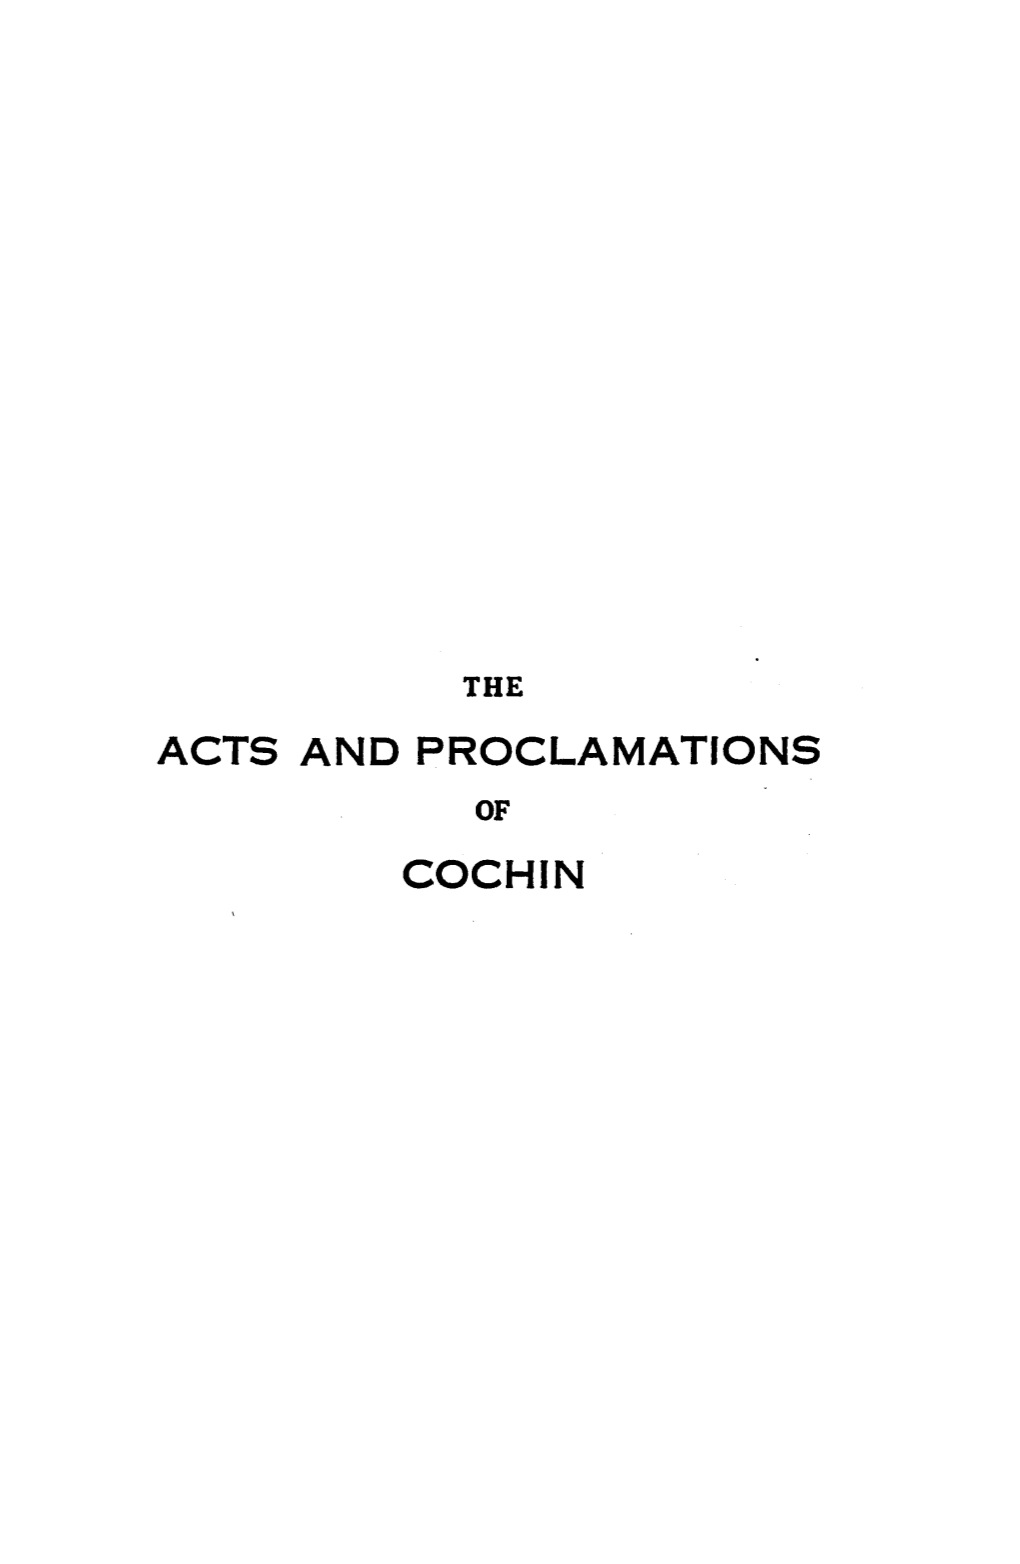 Acts and Proclamations Cochin